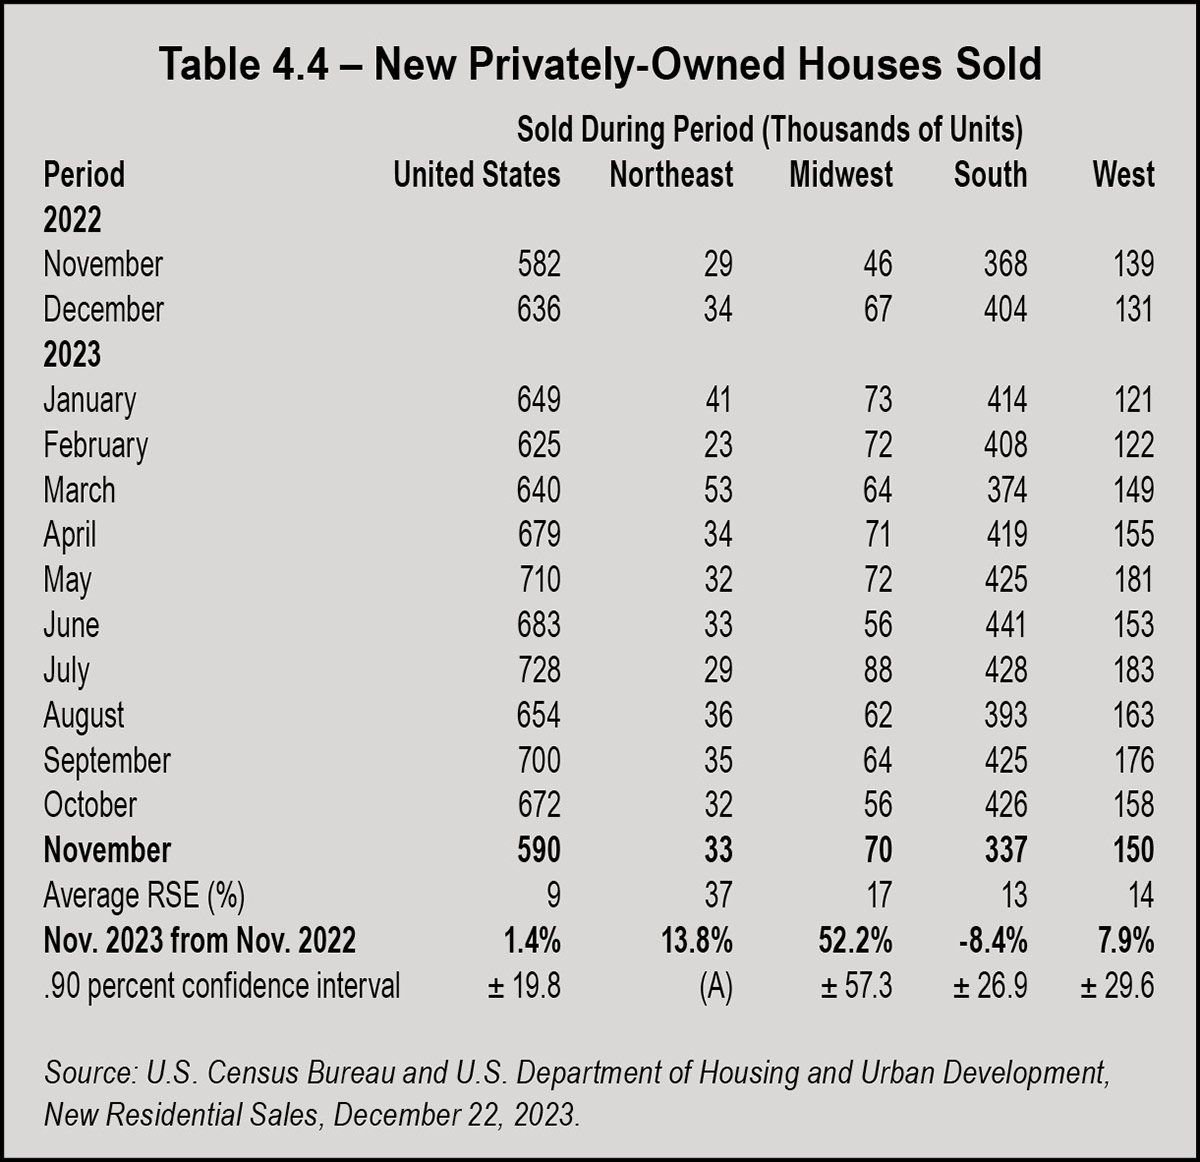 Table 4.4 - New Privately-Owned Houses Sold